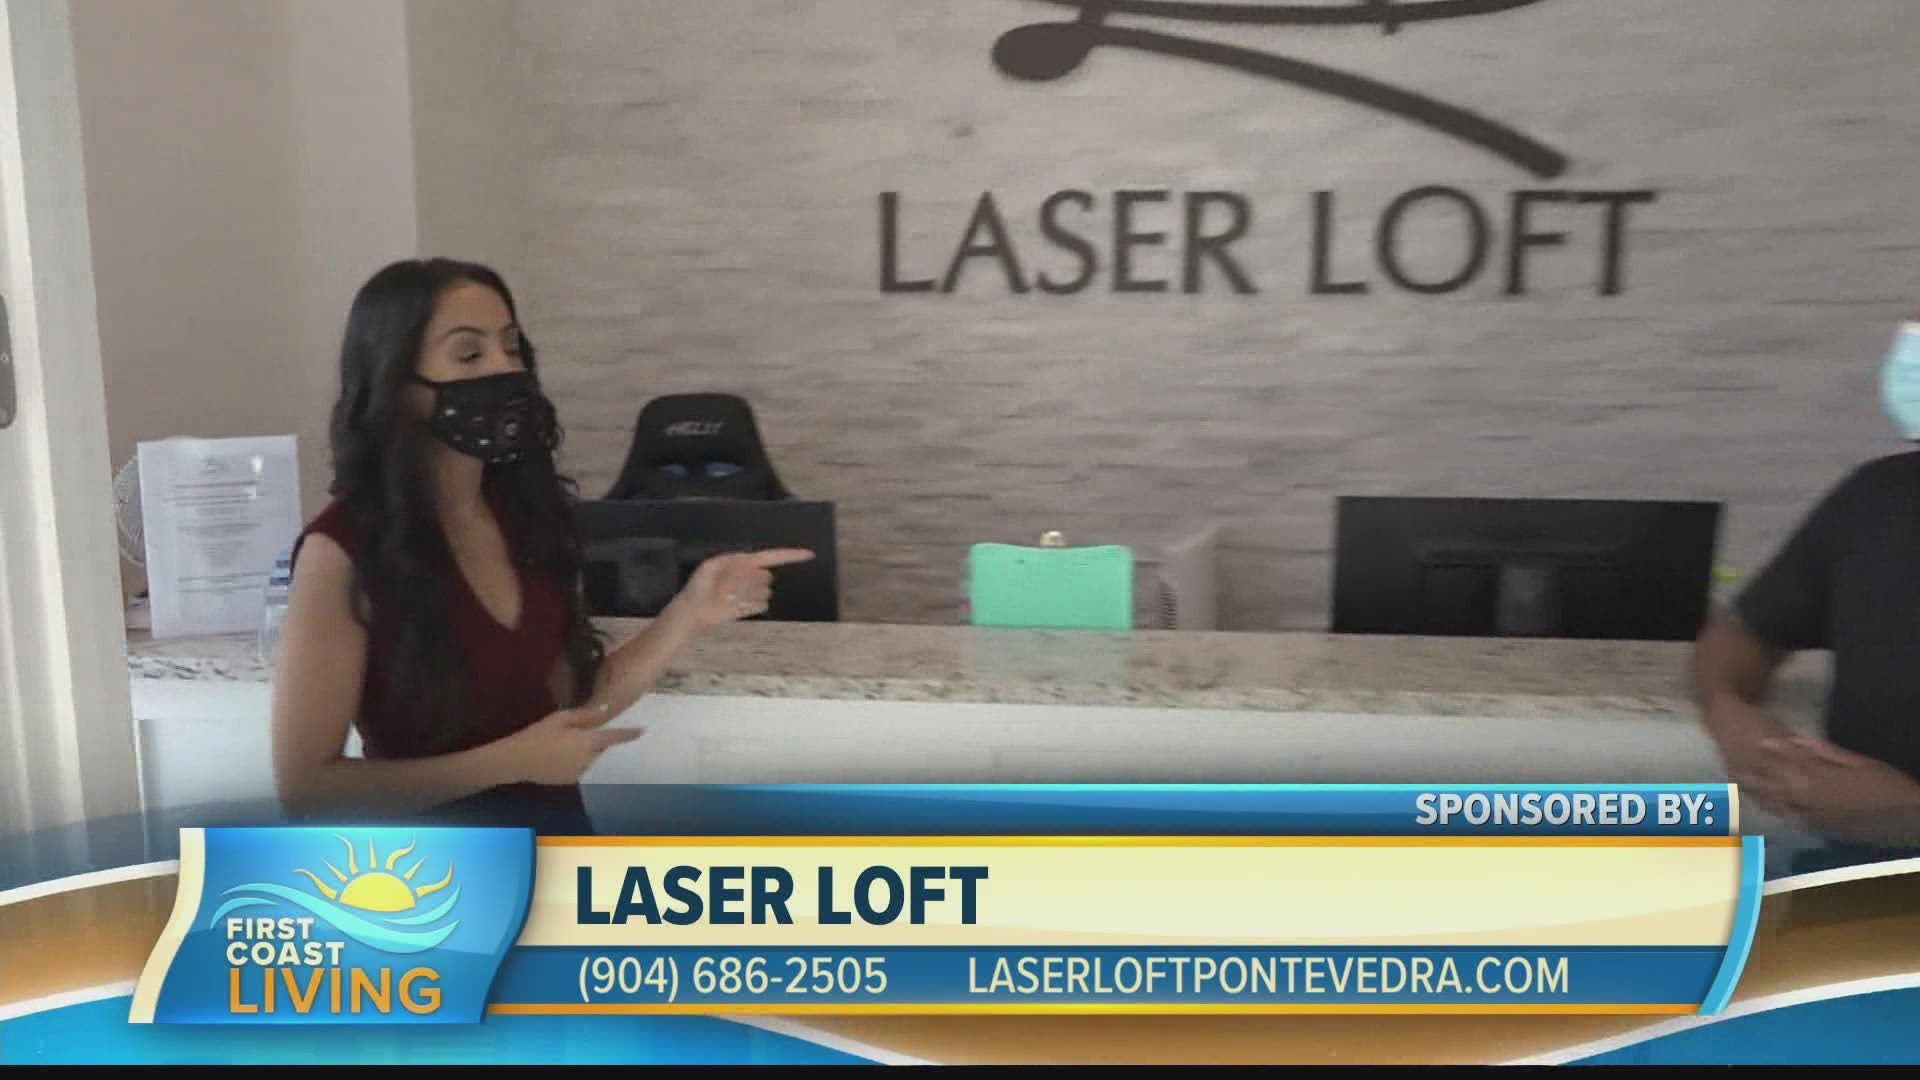 Check out the variety of treatments you can find at Laser Loft